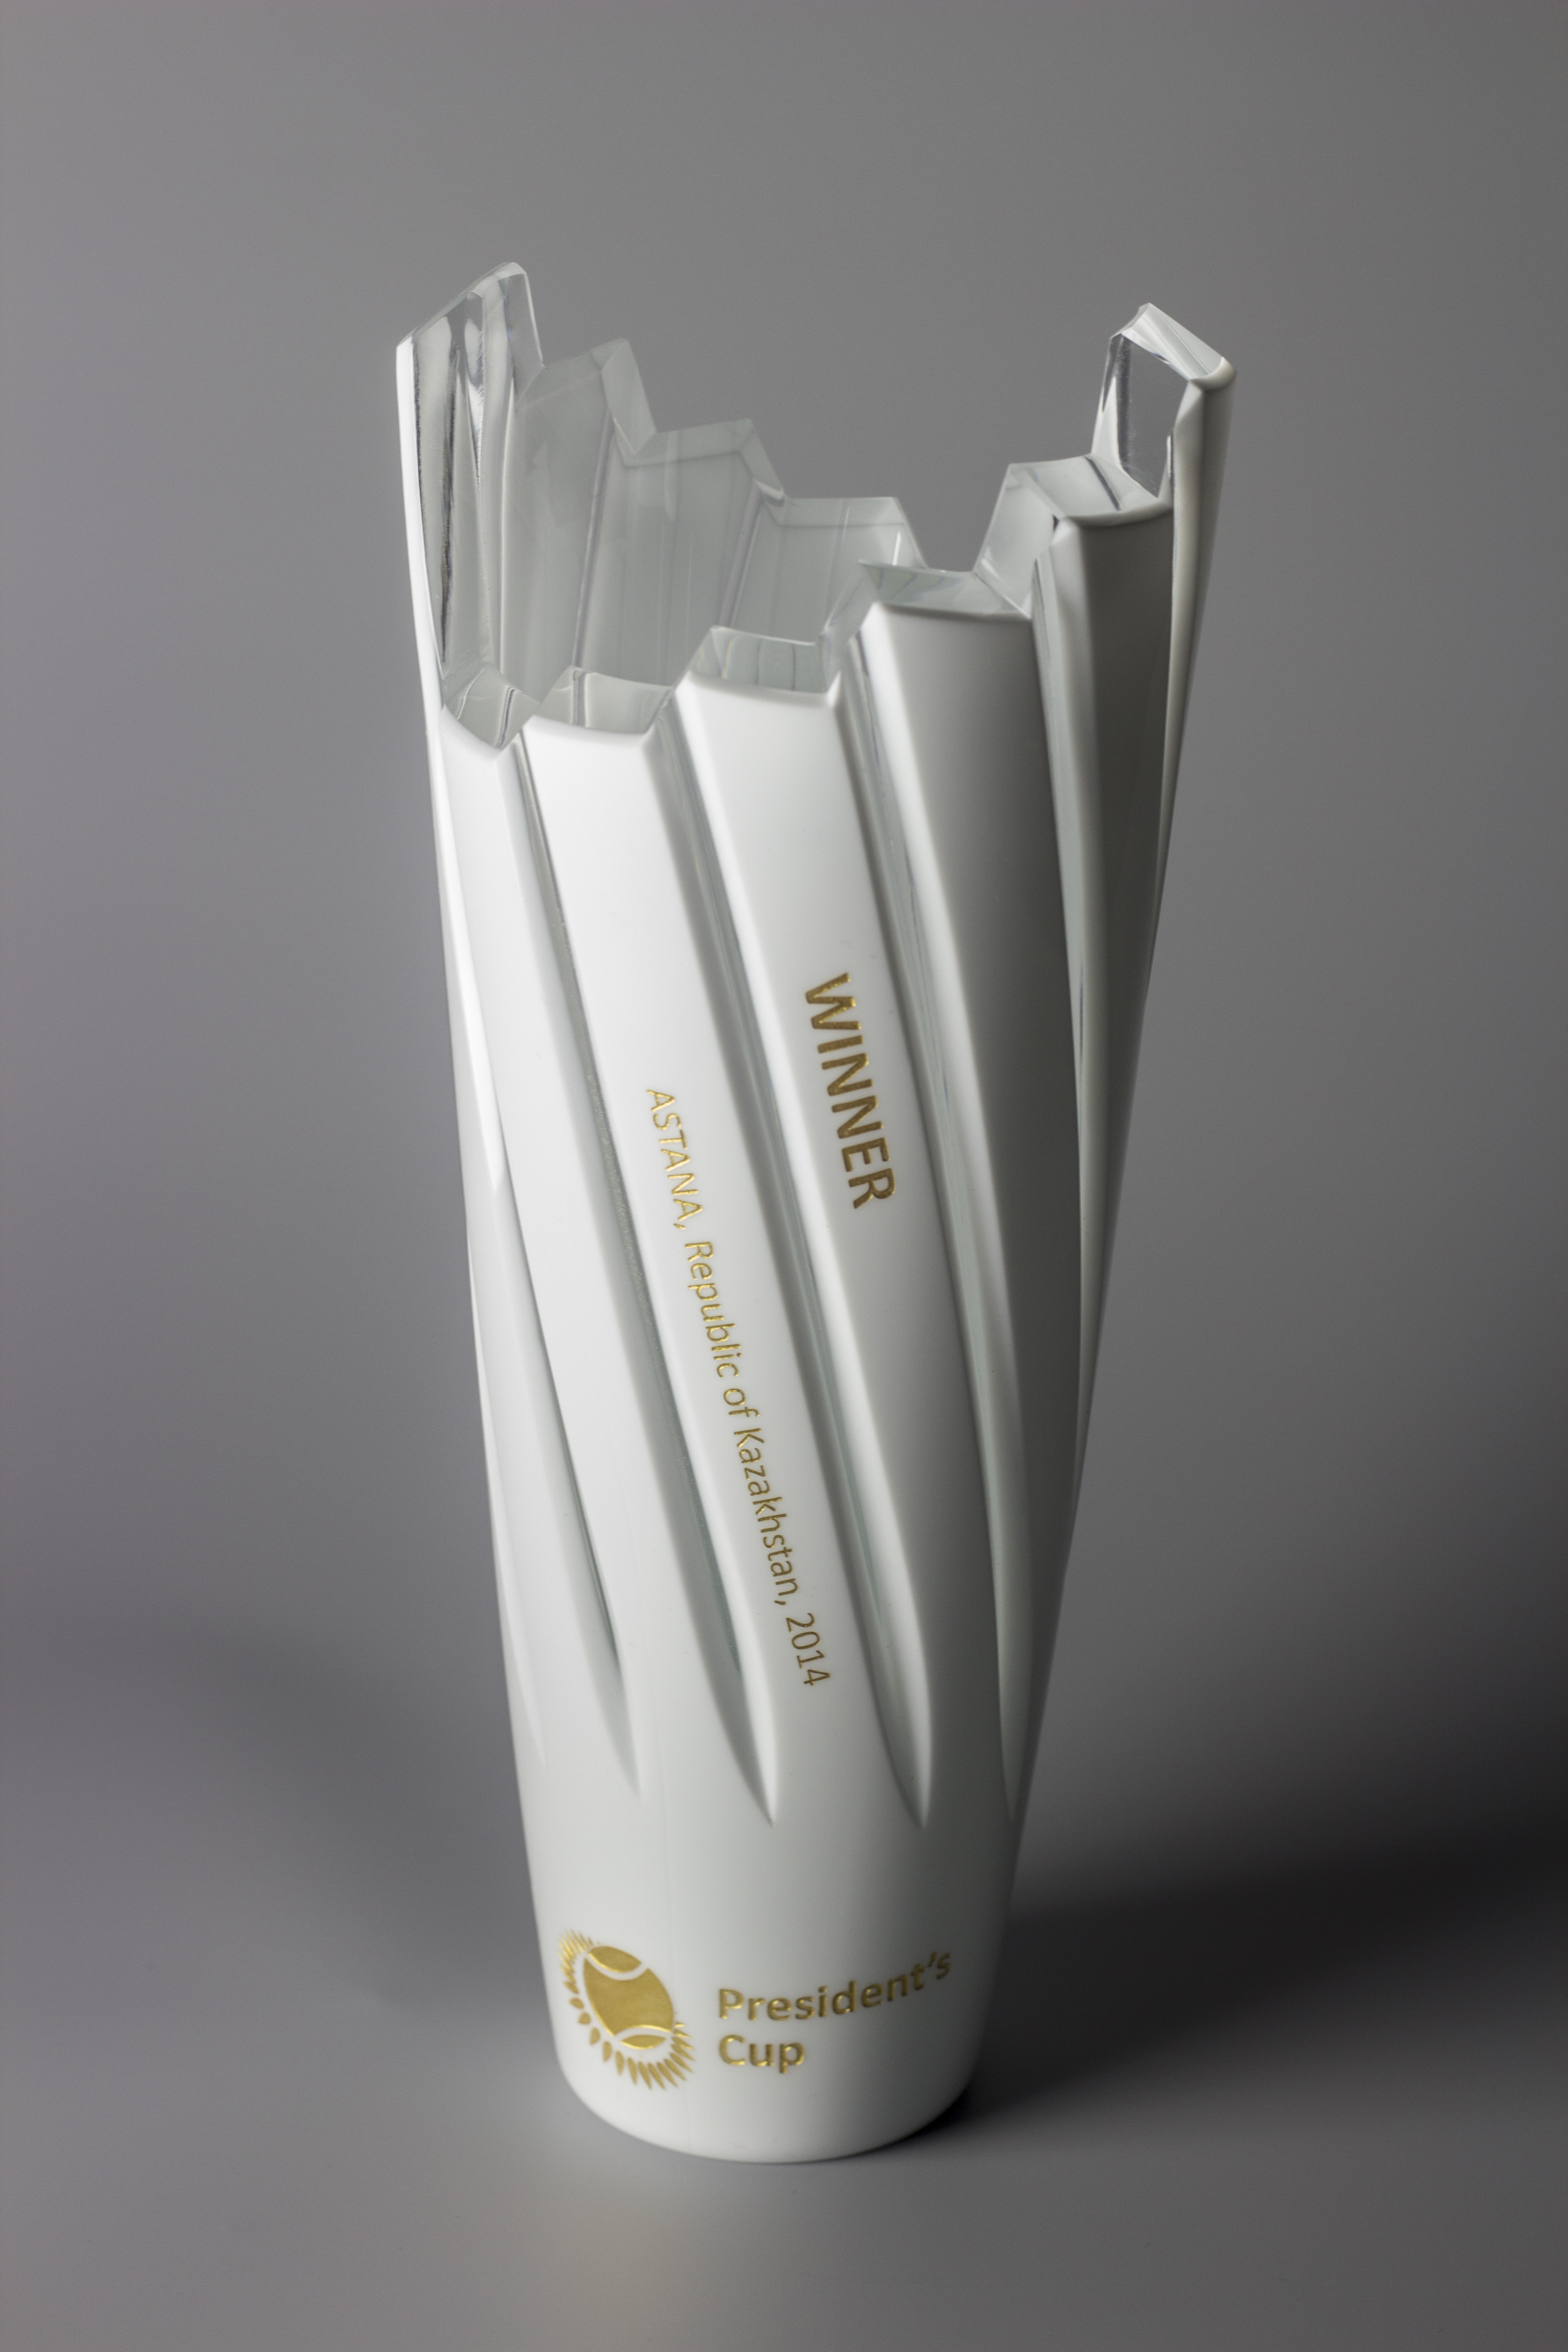 Lasvit Creates Unique Crystal Trophy for the President's Cup Tennis ...